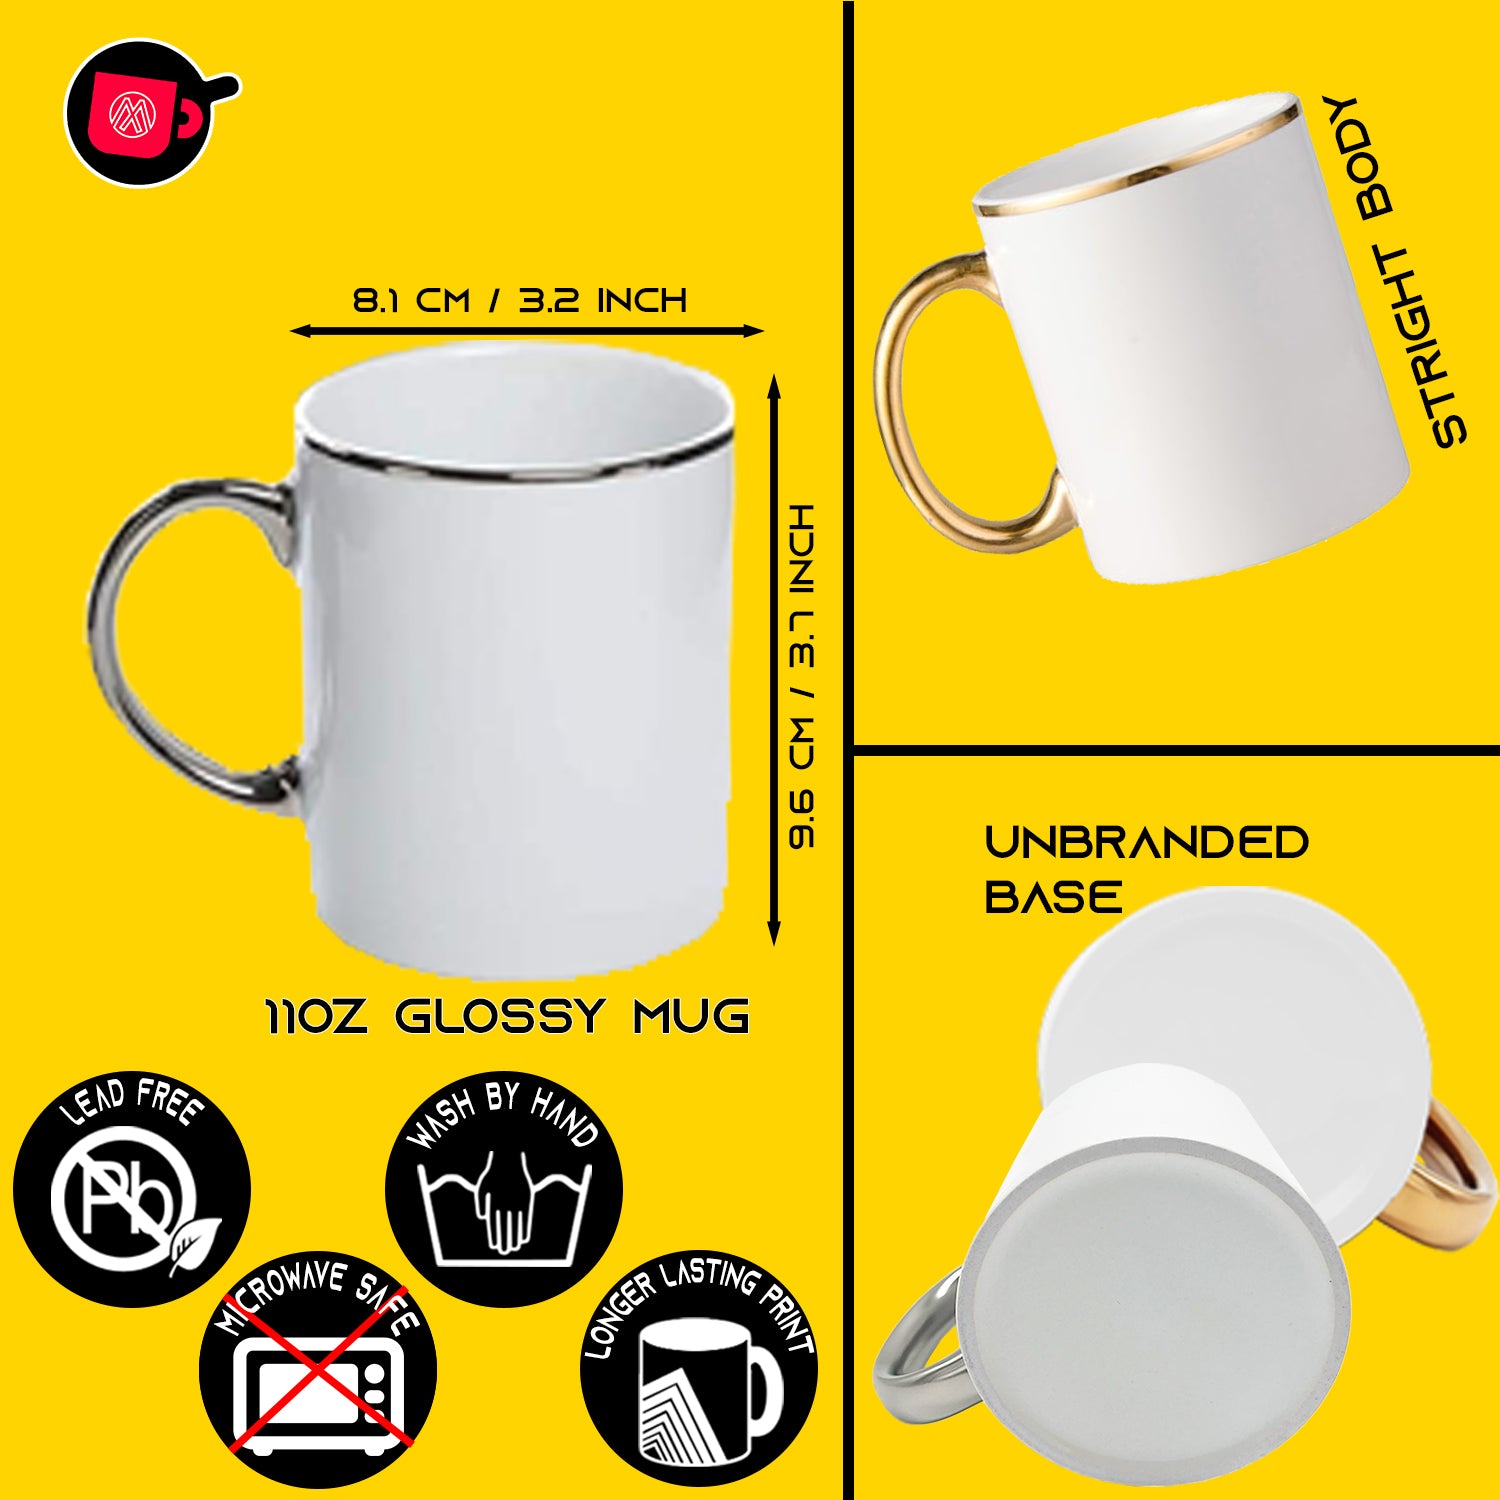 Mugsie | 12 Pack 11 oz. Silver & Gold Rim & Handle- Ceramic Sublimation Mugs - Professional Grade - with Individual White Gift Boxes